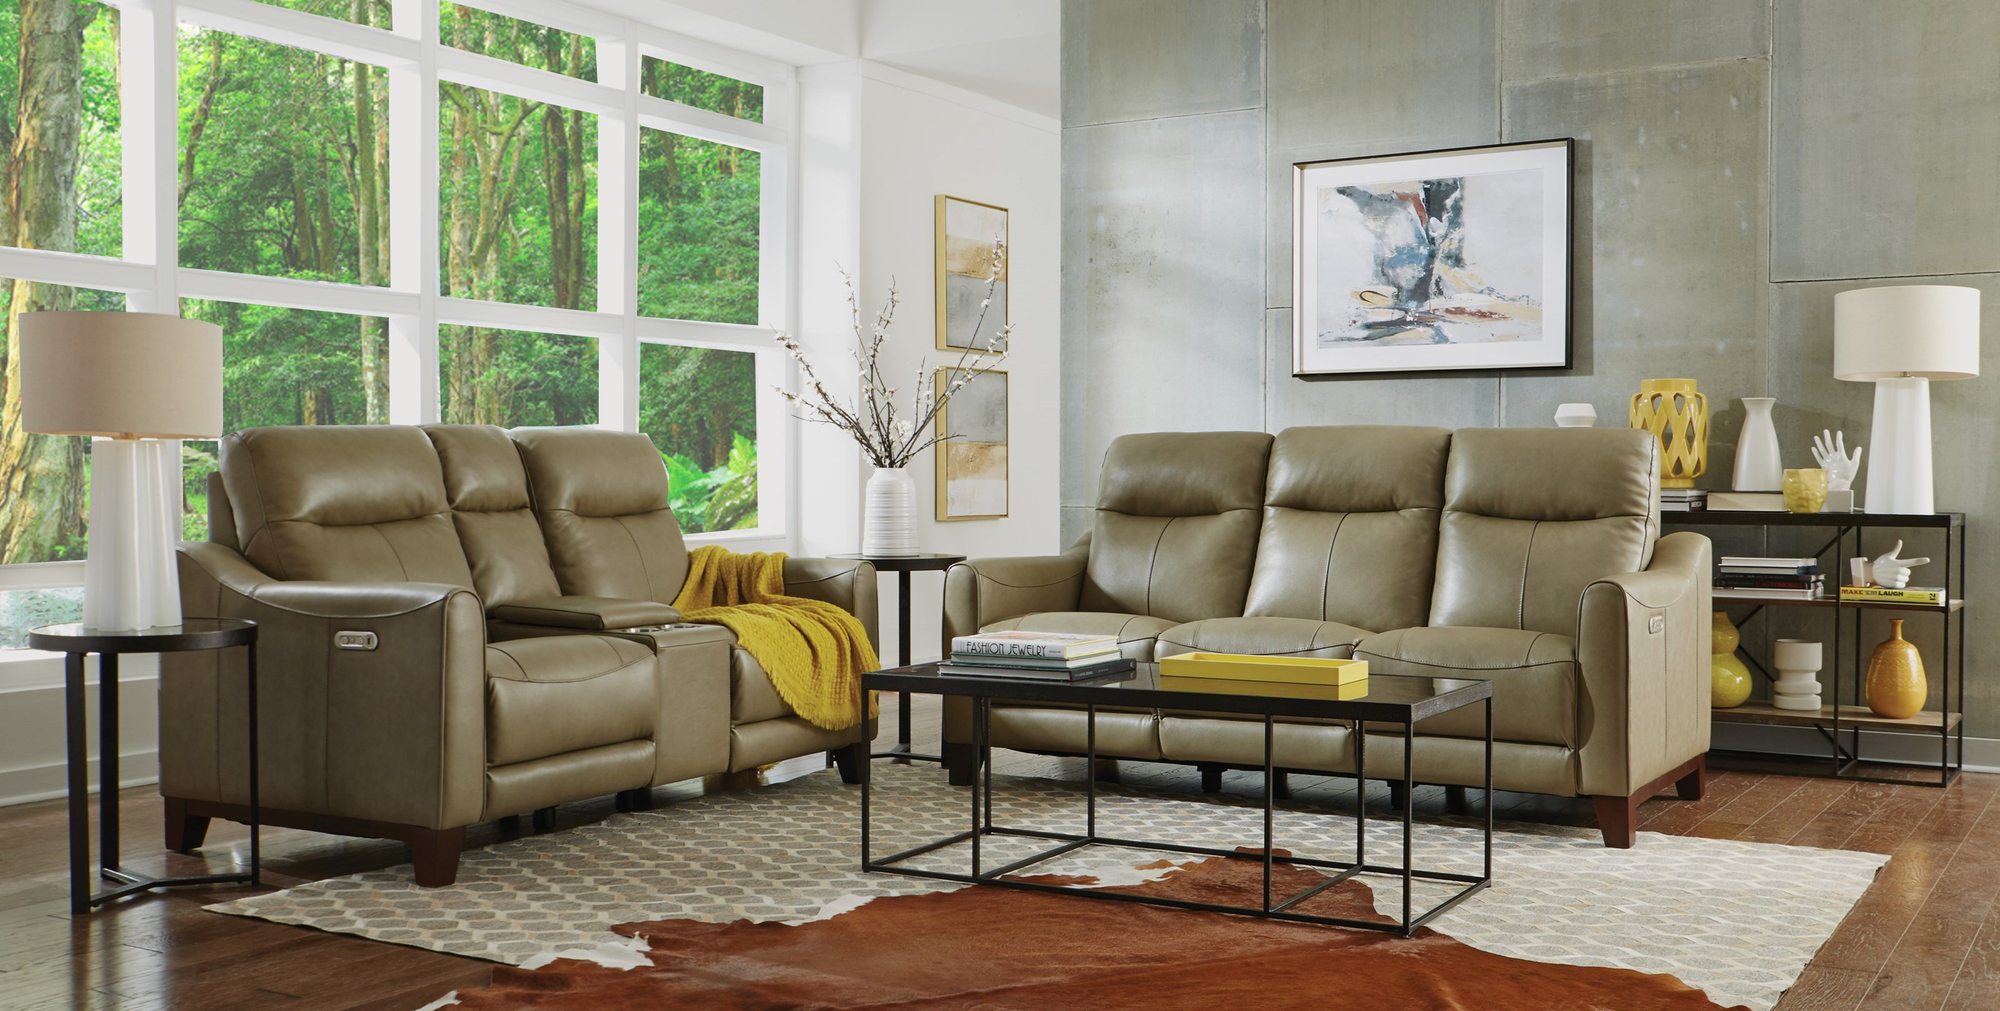 A Guide to Choosing the Best Leather Loveseat for Your Home